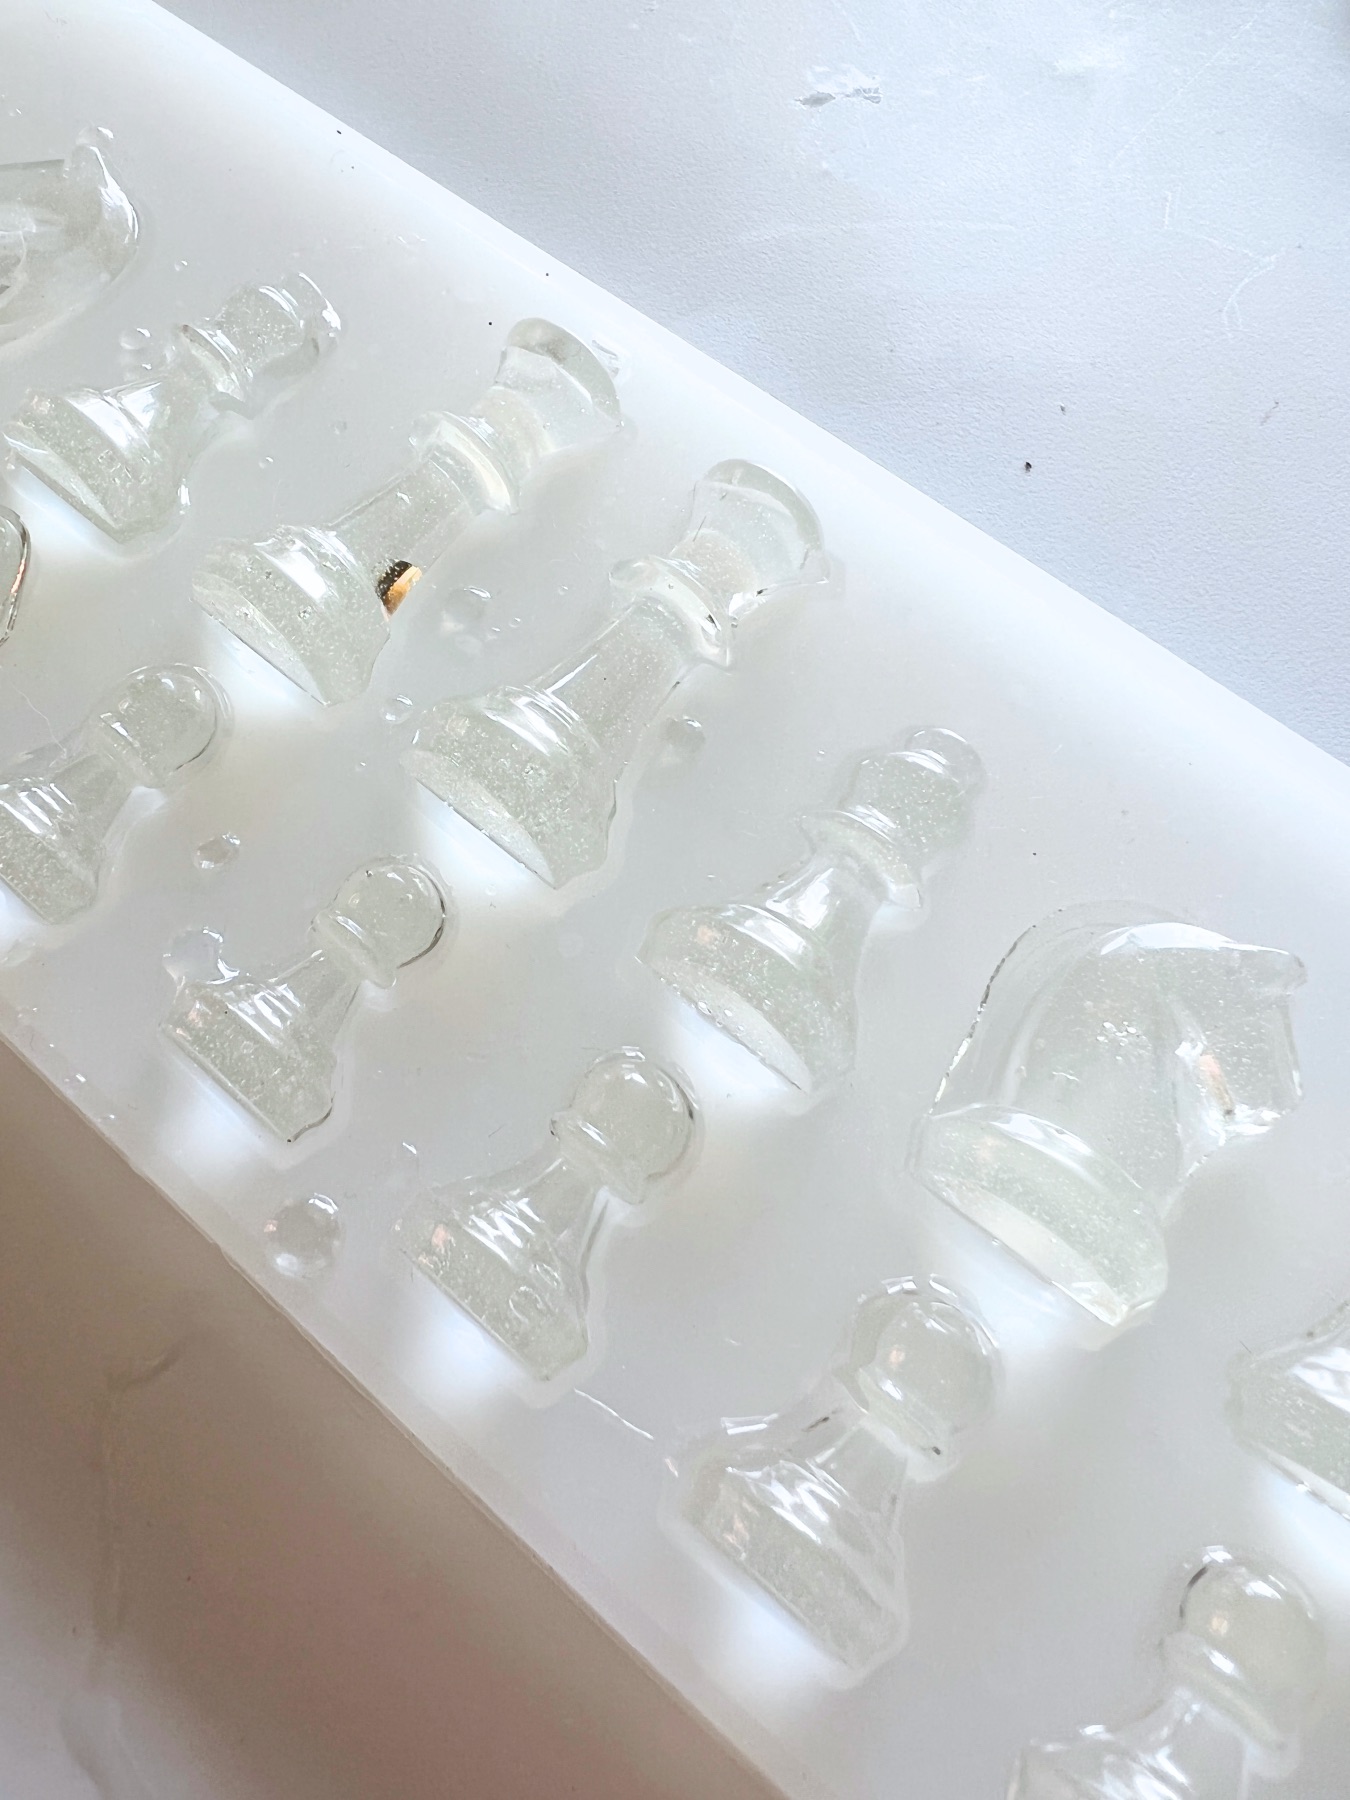 place the chess pieces on liquid resin in the mold